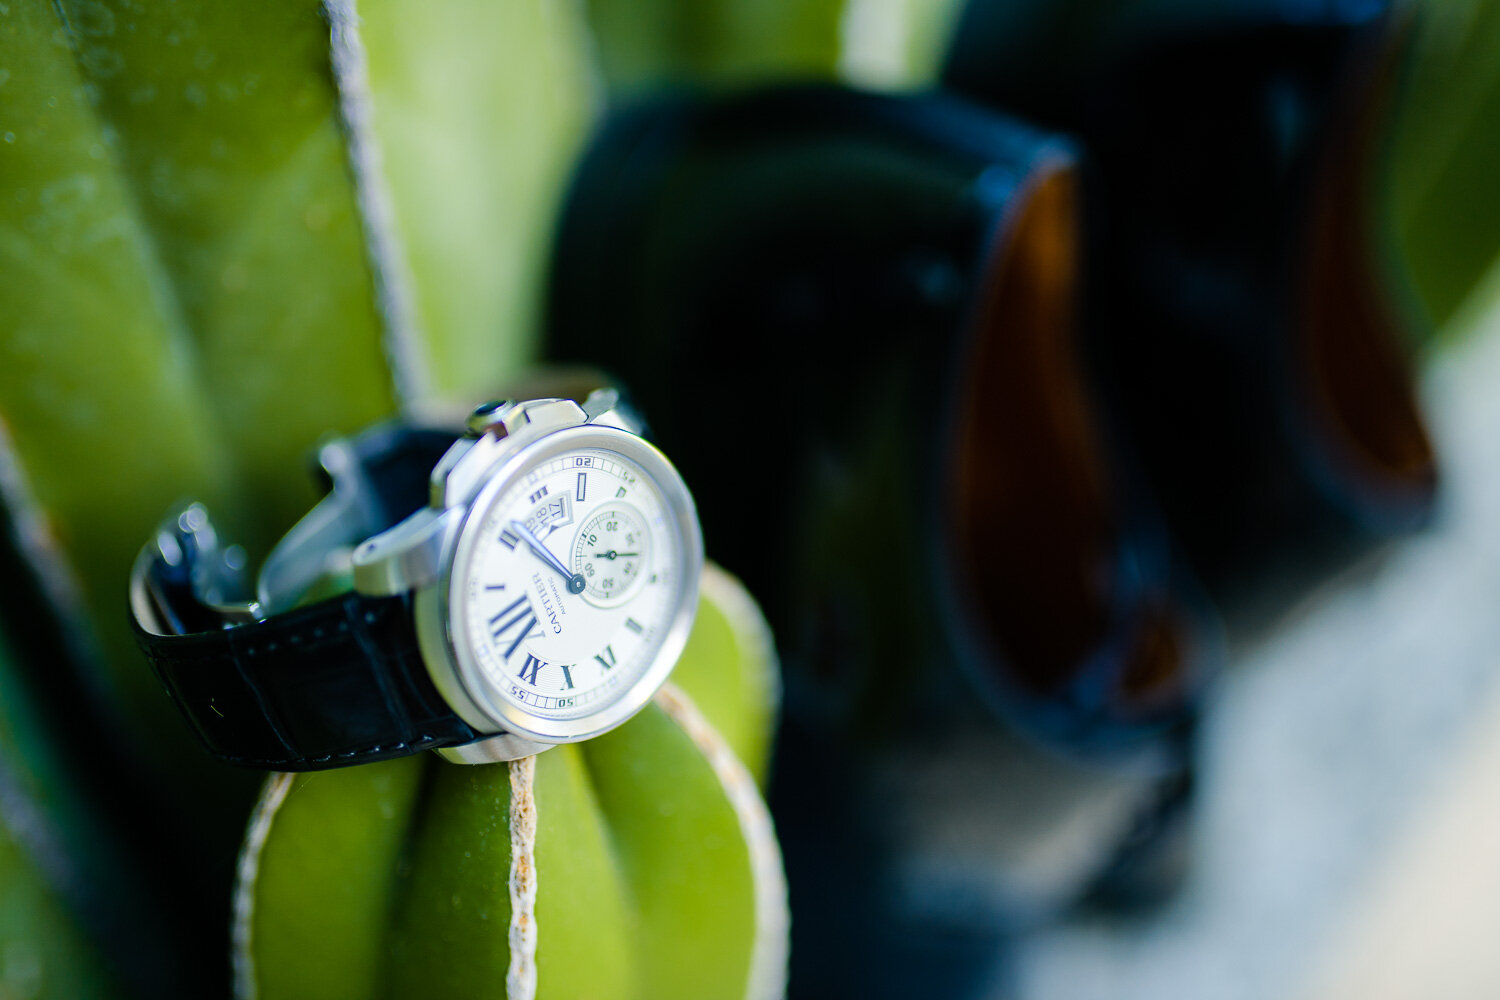 Watch detail picture on top of a cactus (Copy)